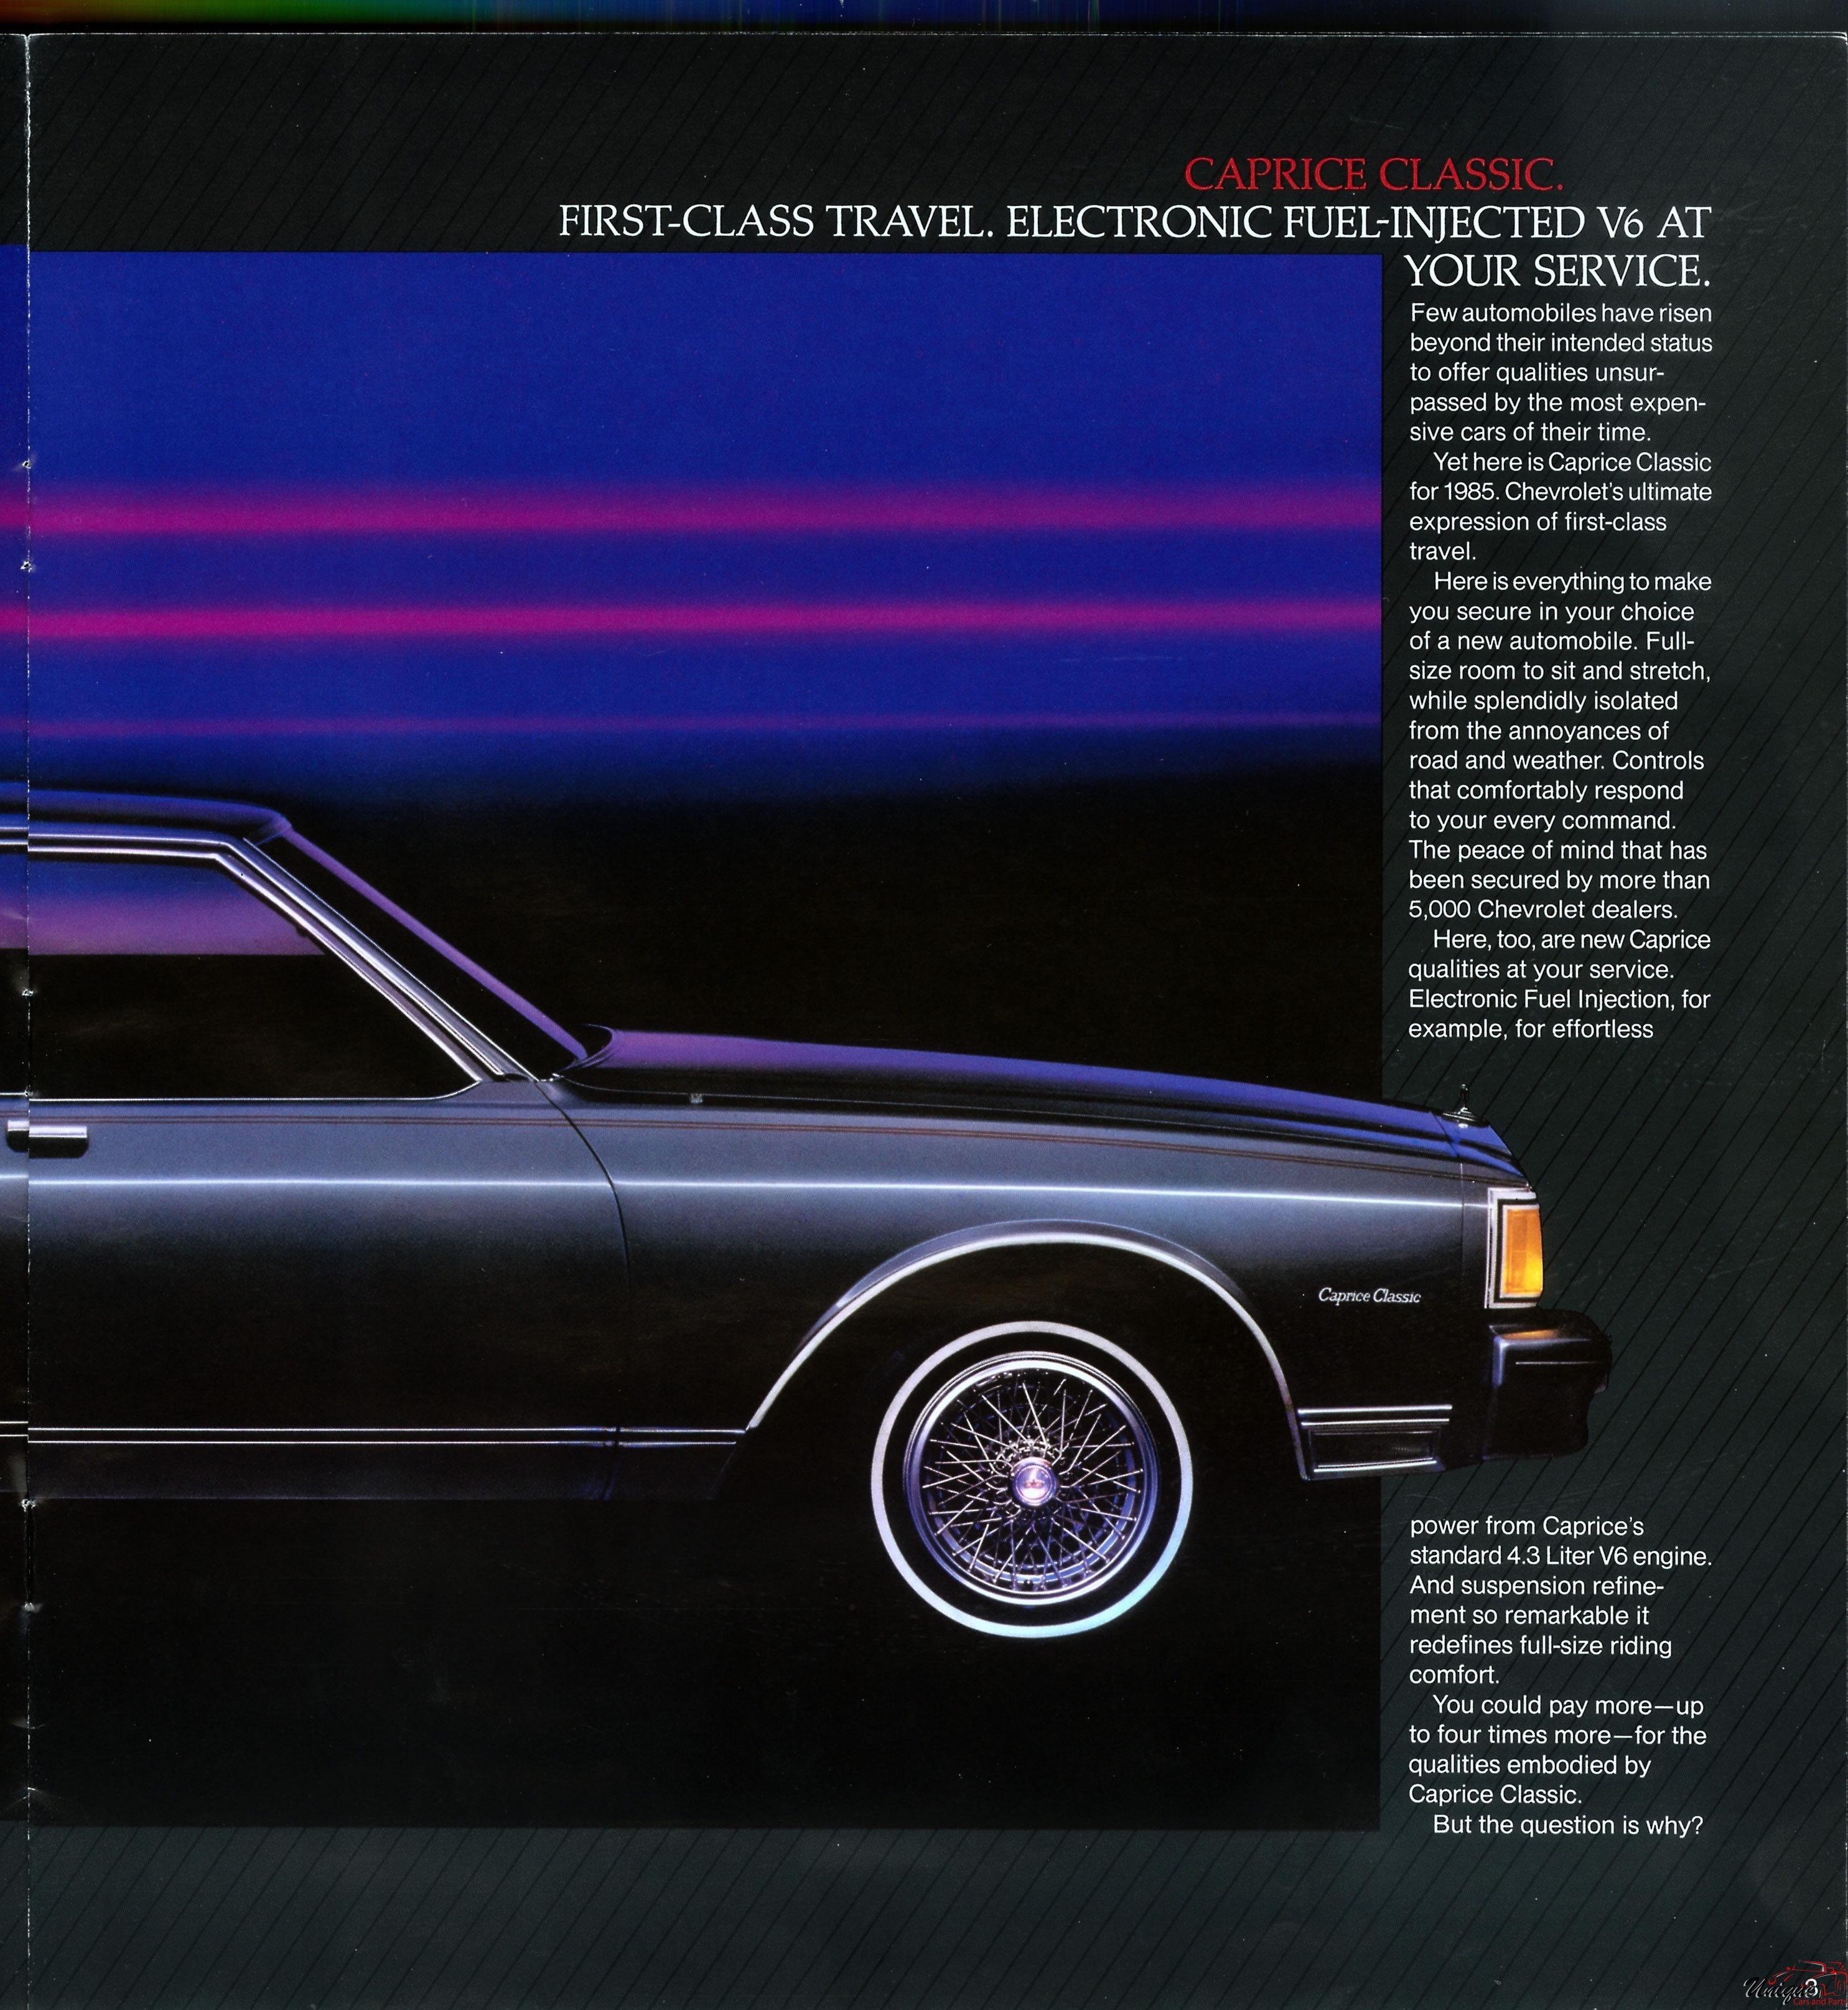 1985 Chevrolet Caprice Brochure Page 1